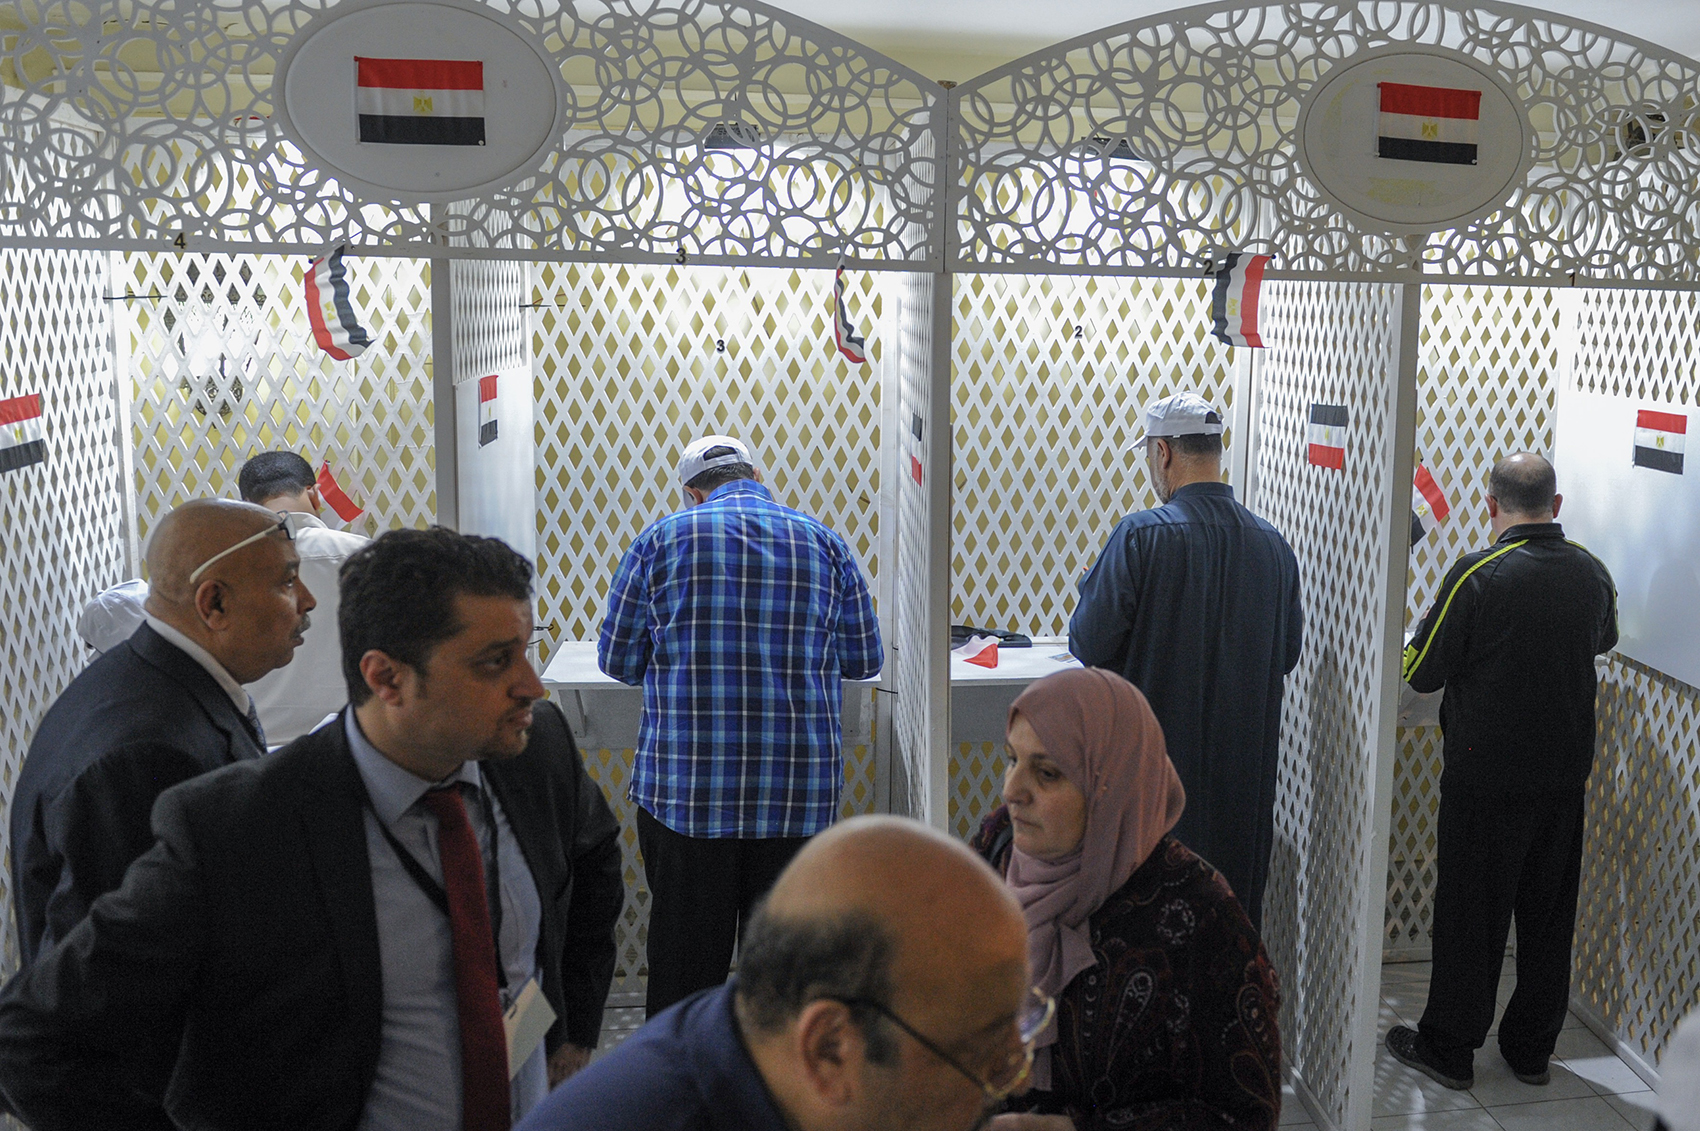 Egyptian nationals in the polling station